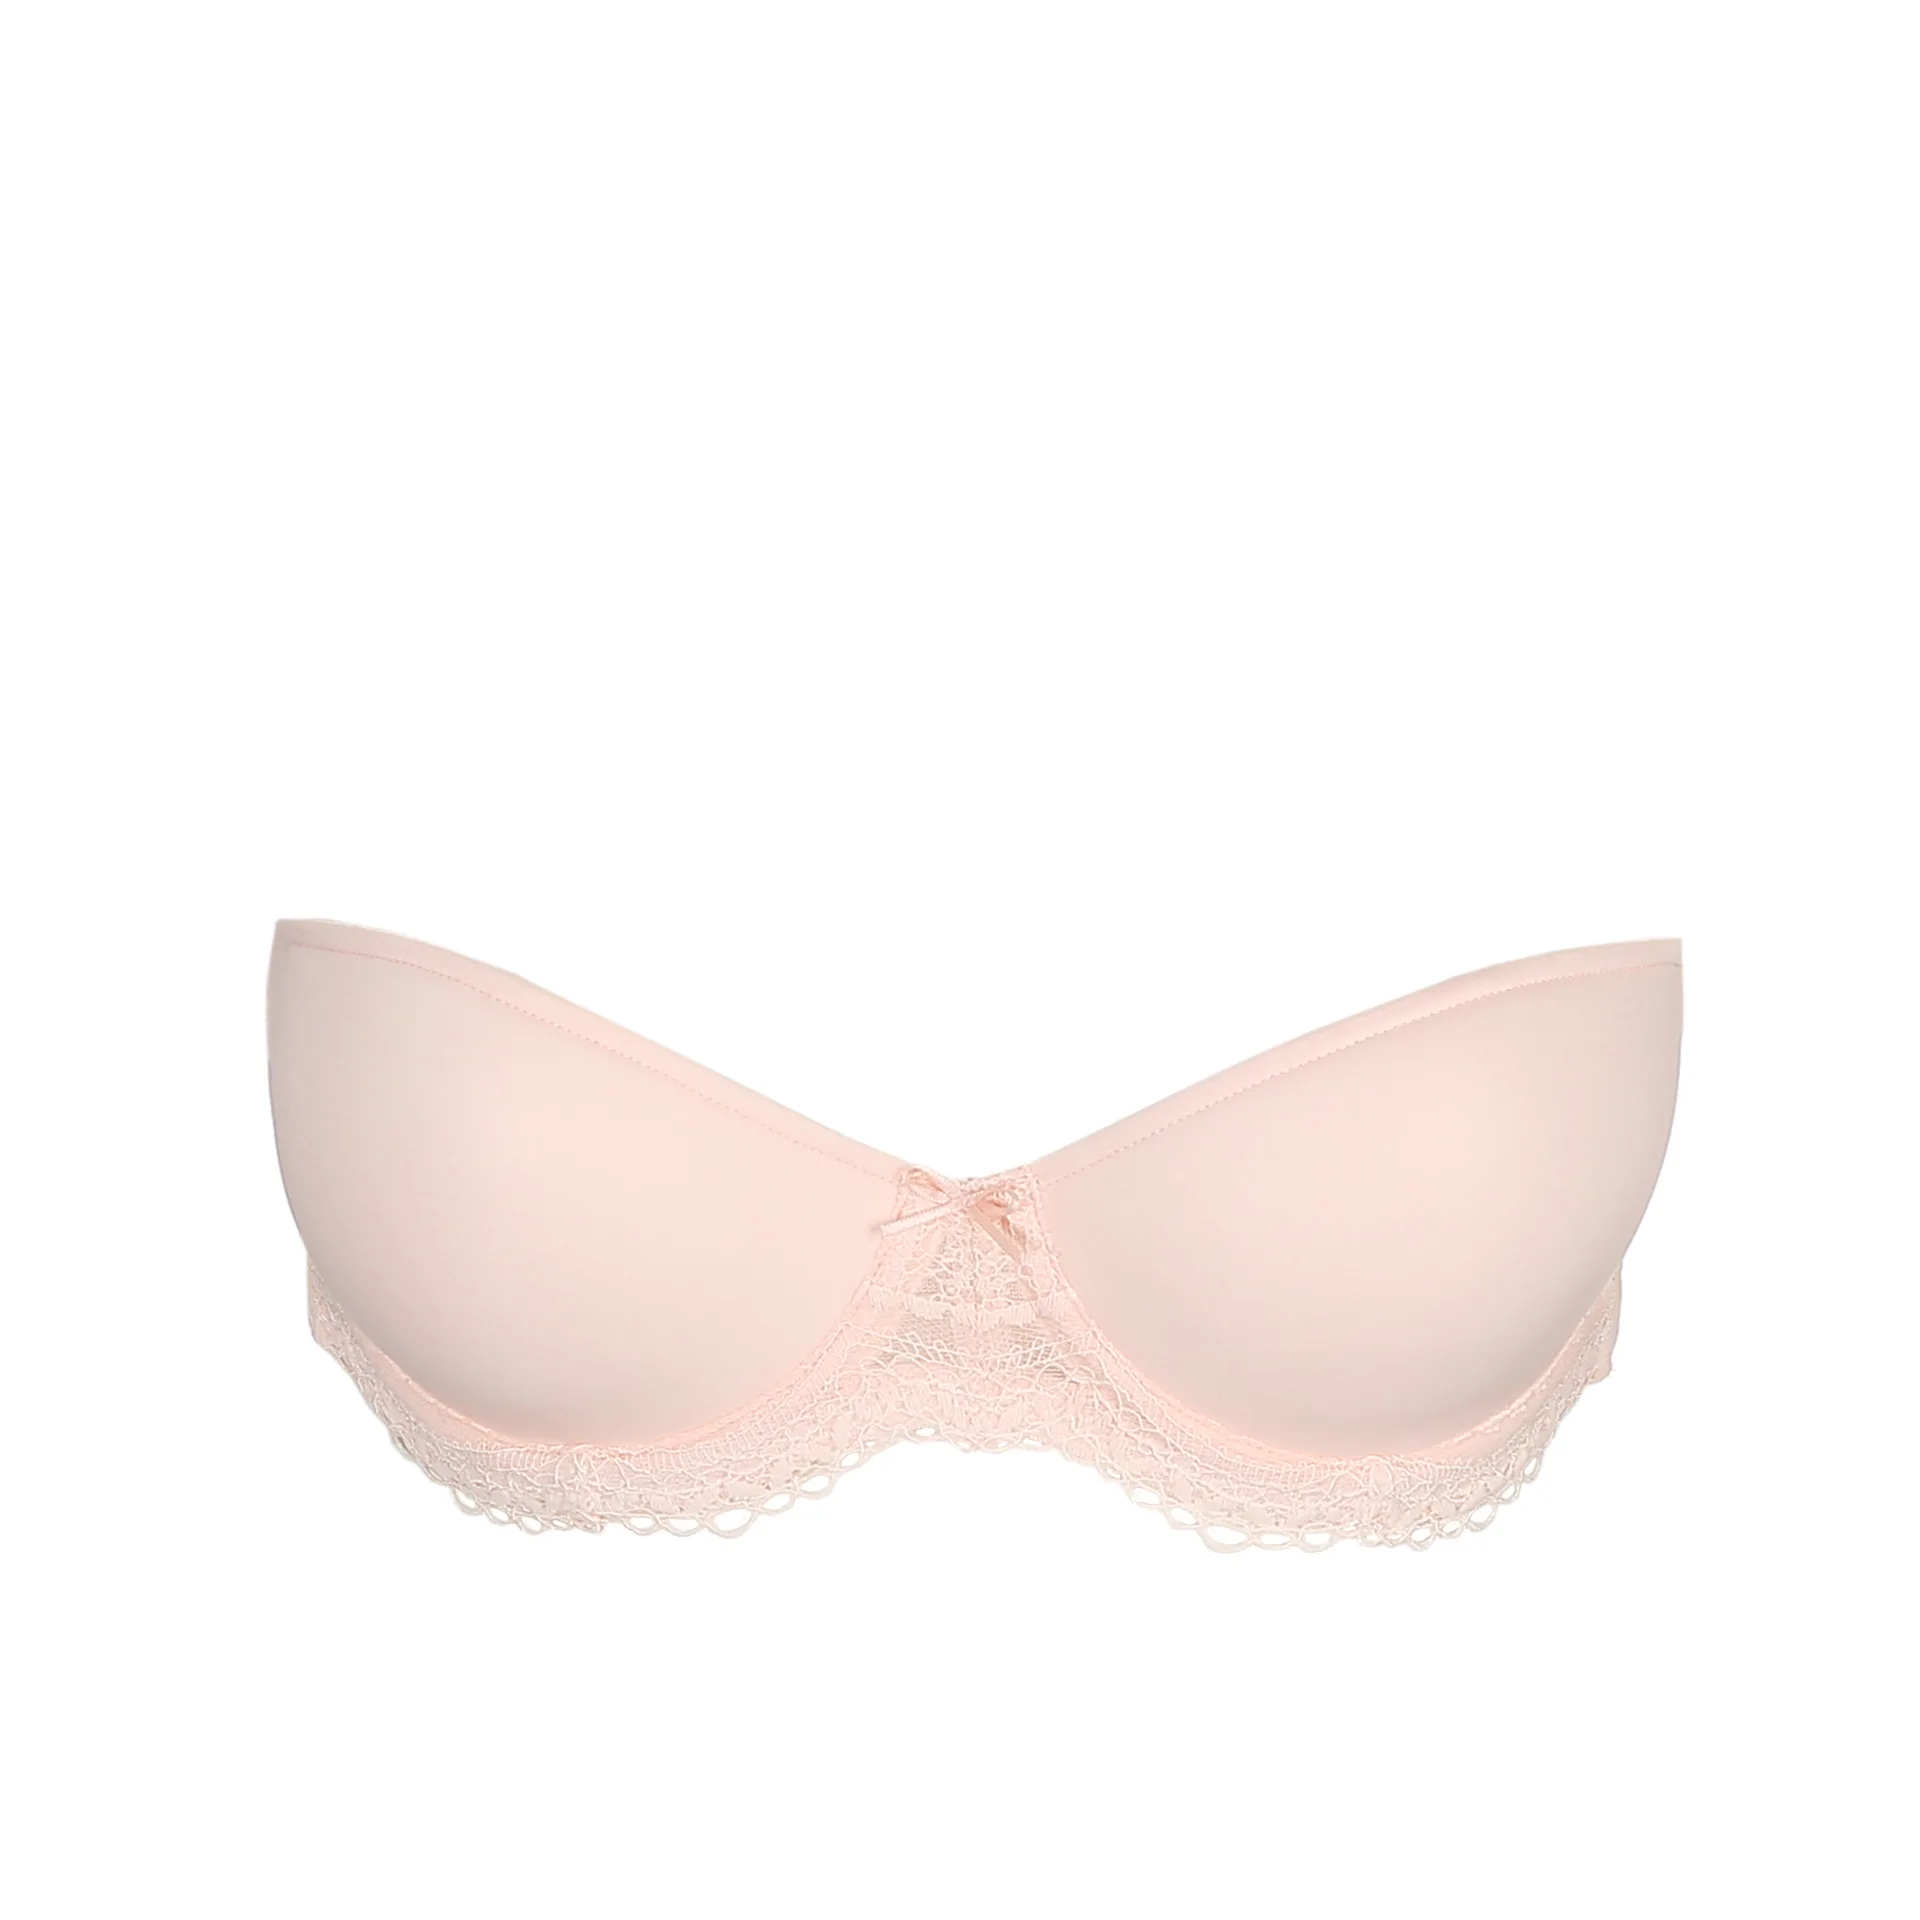 Marie Jo DOLORES glossy pink padded bra - strapless